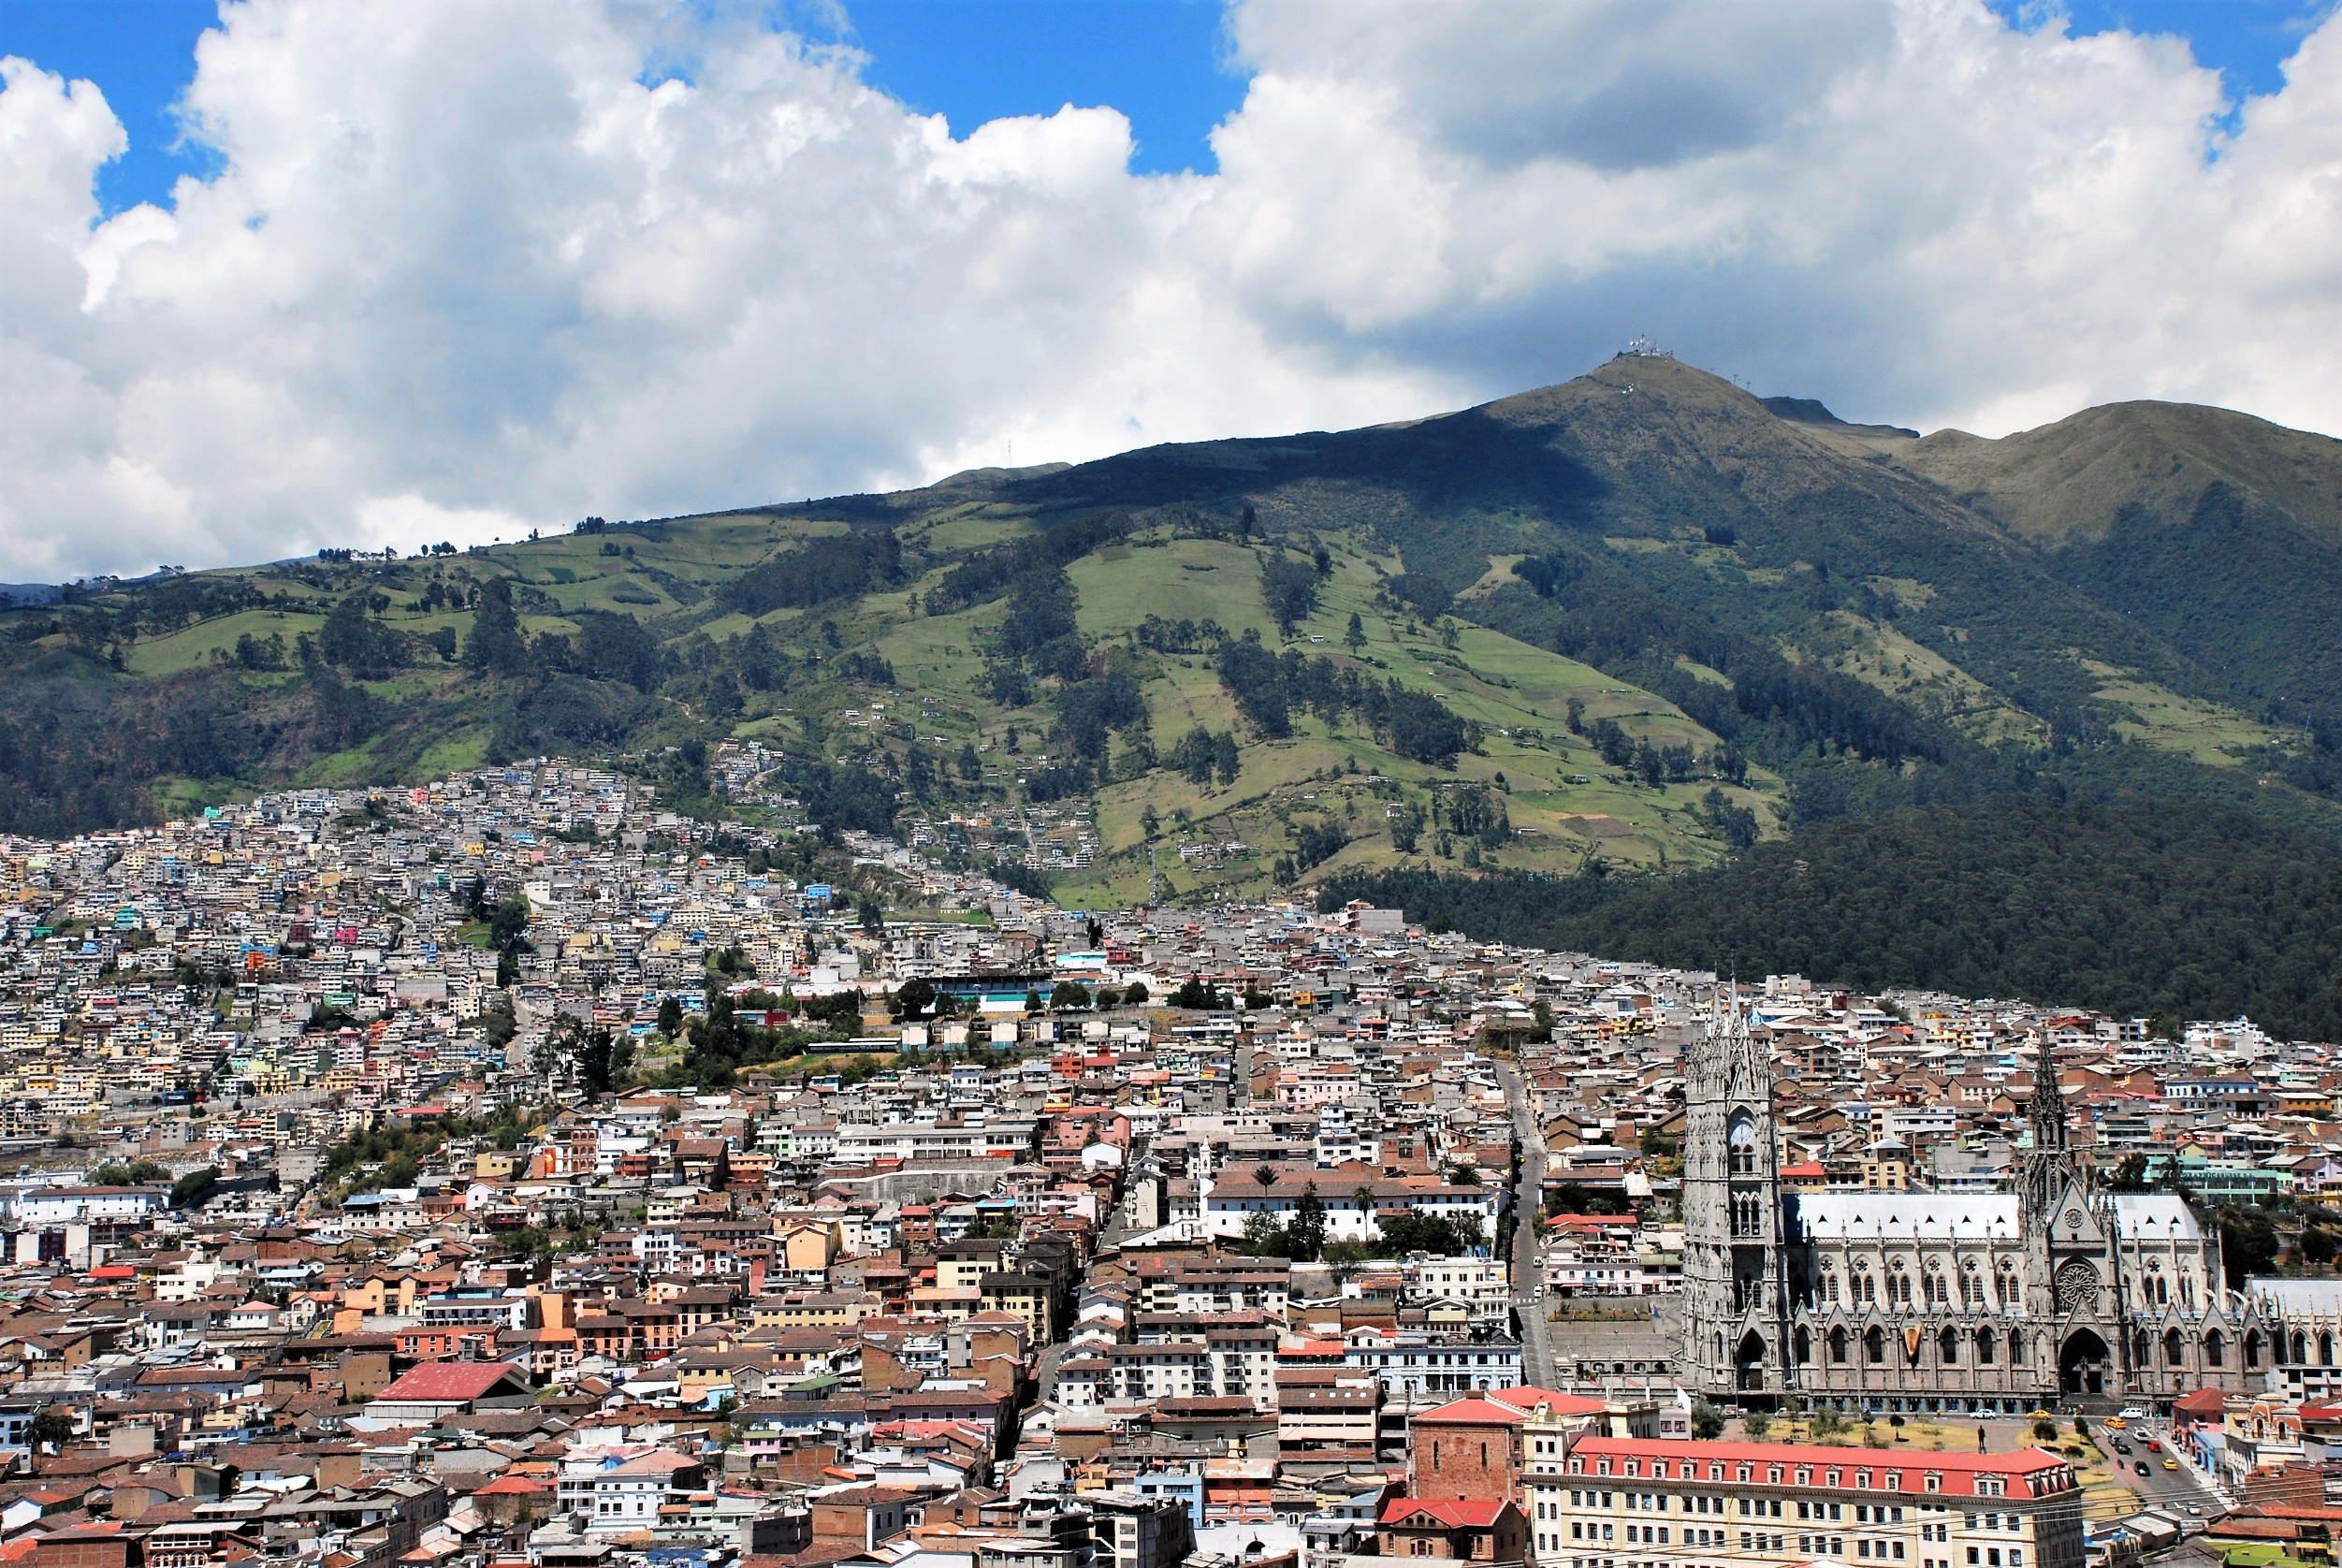 <p>Quito, the capital of Ecuador, is known for its stunning colonial architecture and vibrant indigenous culture. The cost of living here is low, with housing available for a fraction of what you’d pay in North America or Europe. The city’s rich history, coupled with the affordability of necessities, makes it an attractive destination for budget-conscious expats.</p>